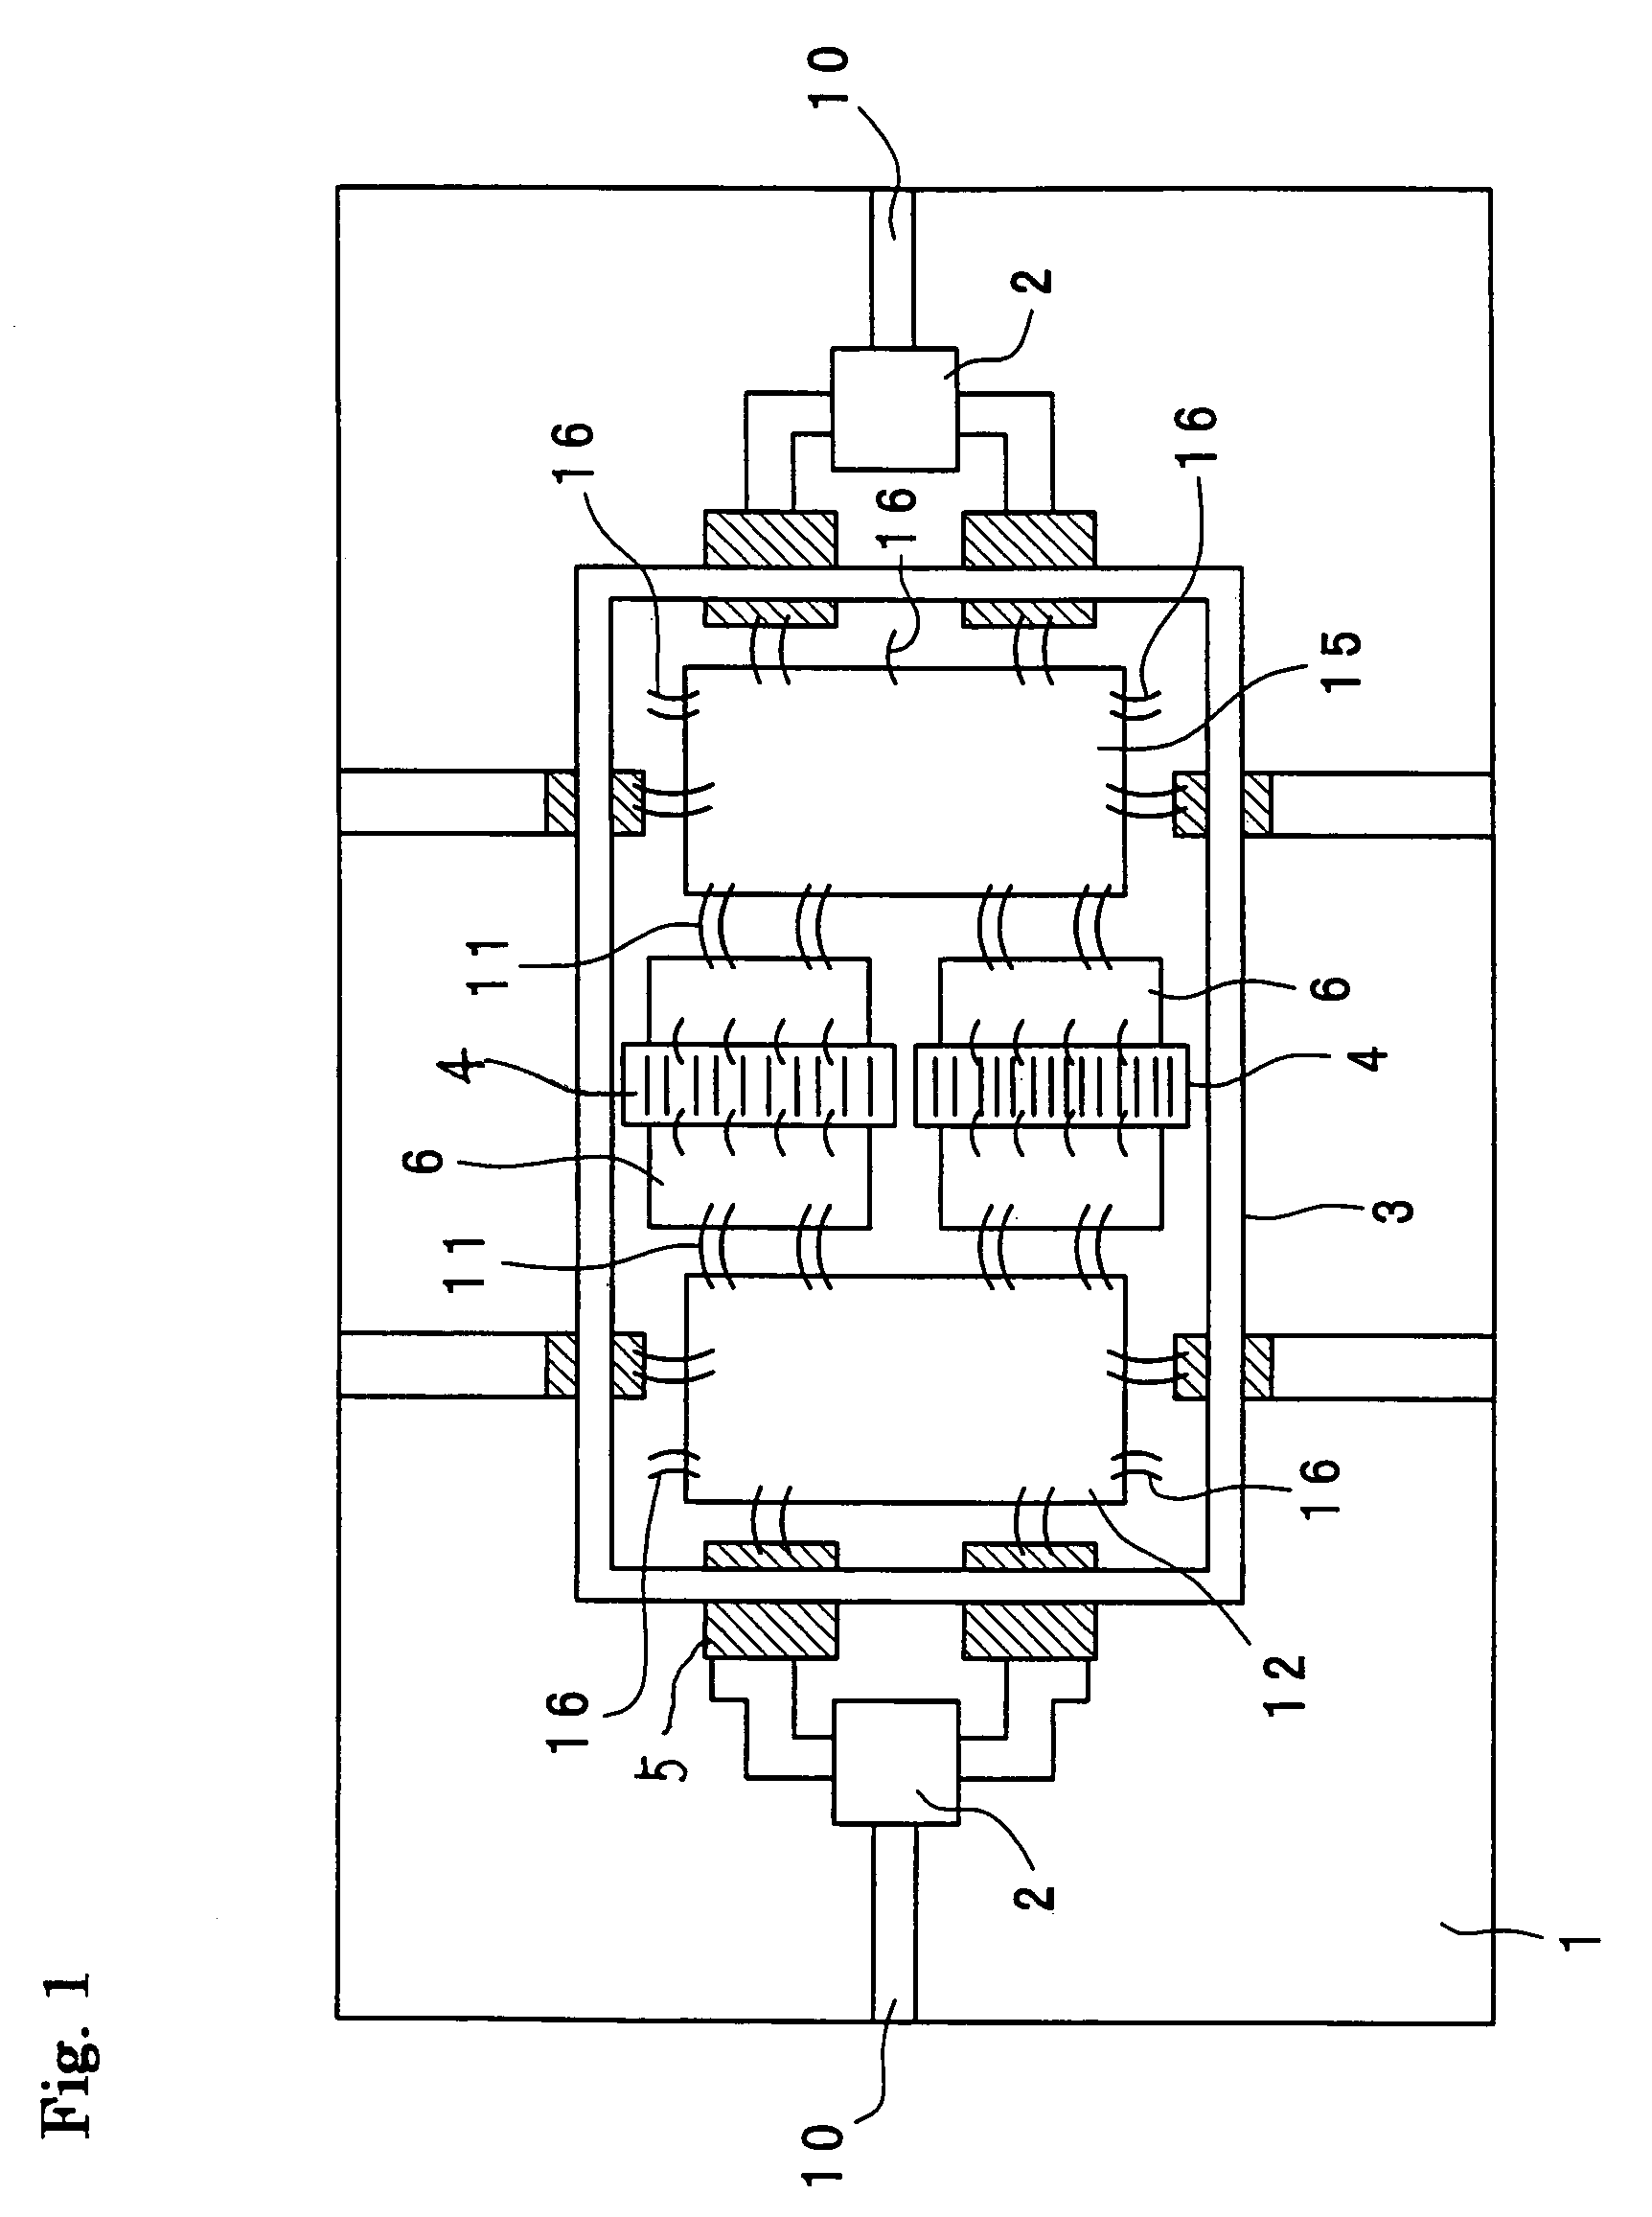 Semiconductor device having balanced circuit for use in high frequency band